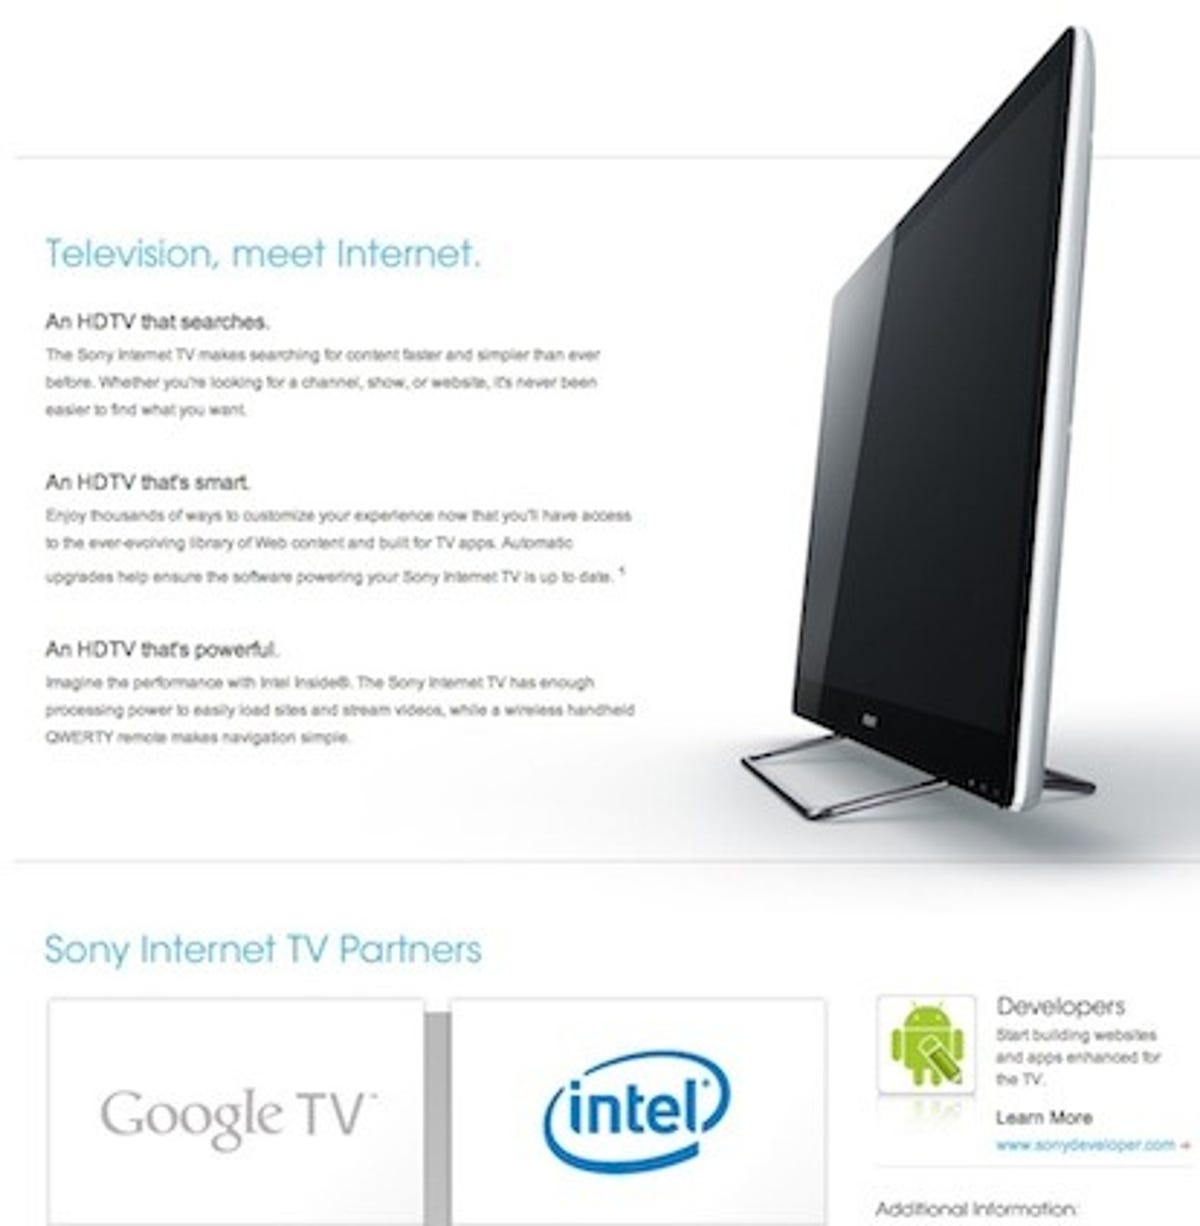 A TV? A computer? The Intel and Android logos on this Sony Internet TV Web page imply computer, not TV necessarily.